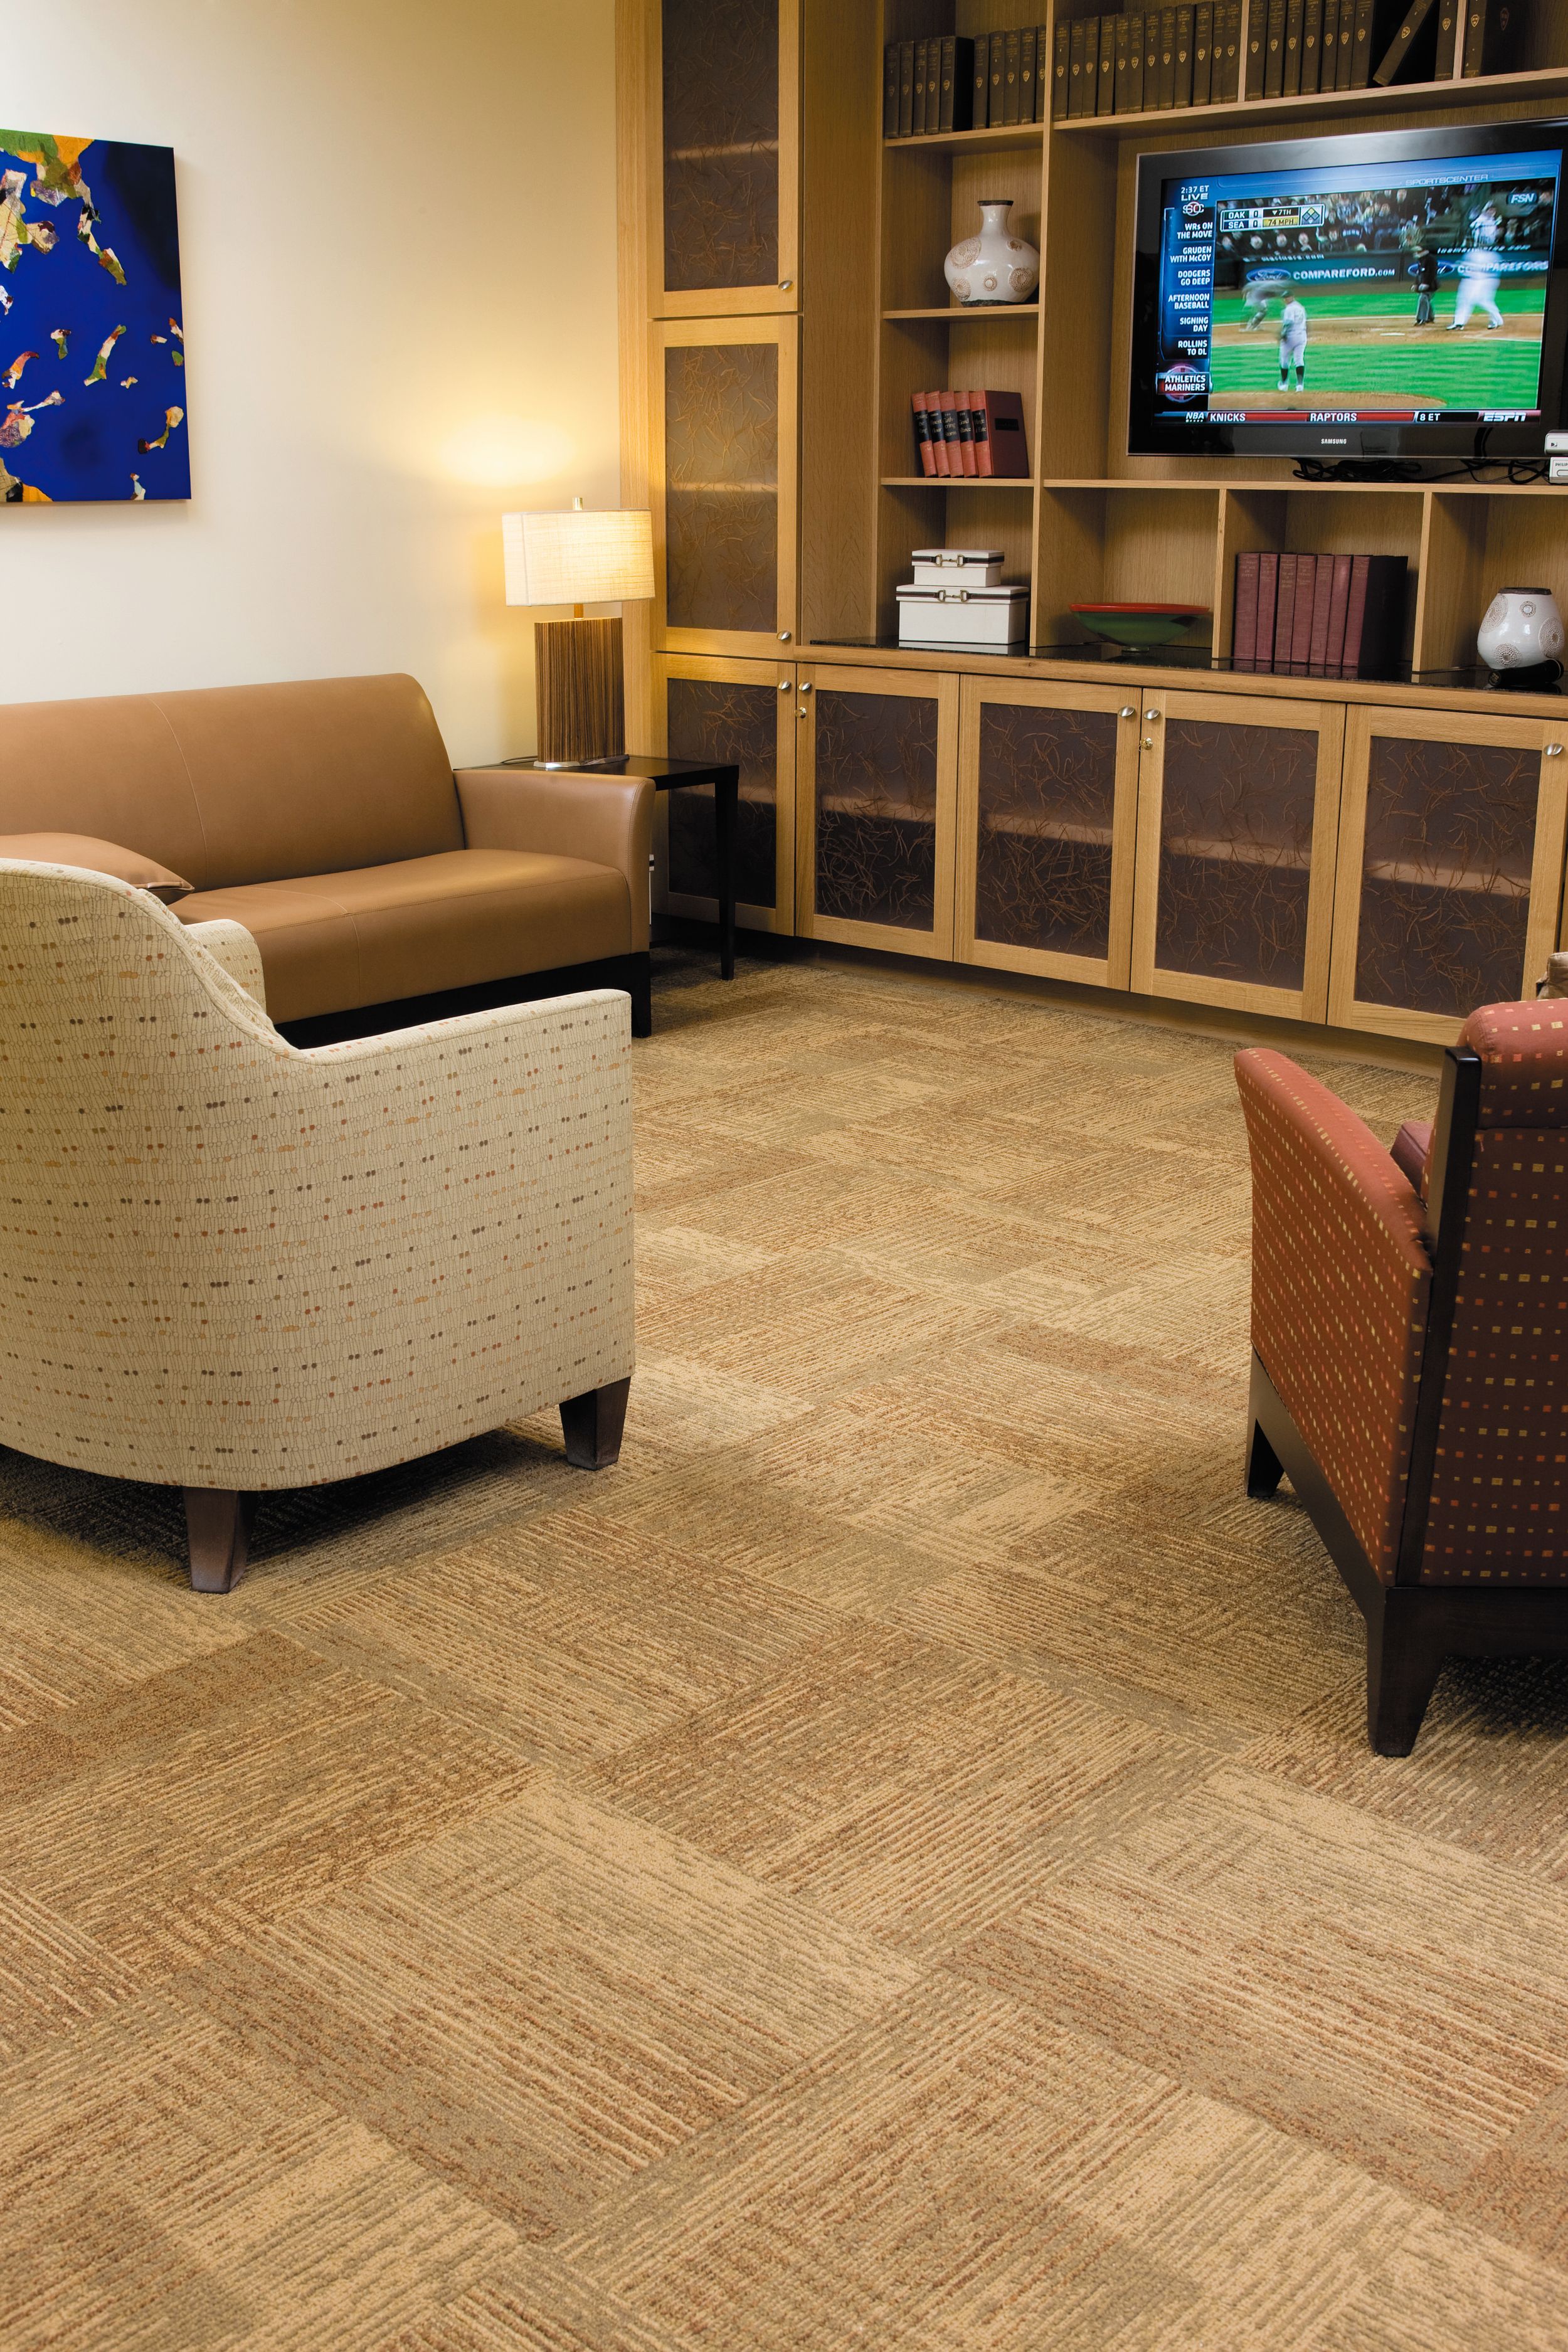 Interface Plain Weave carpet tile in living room area with couch and two chairs numéro d’image 5